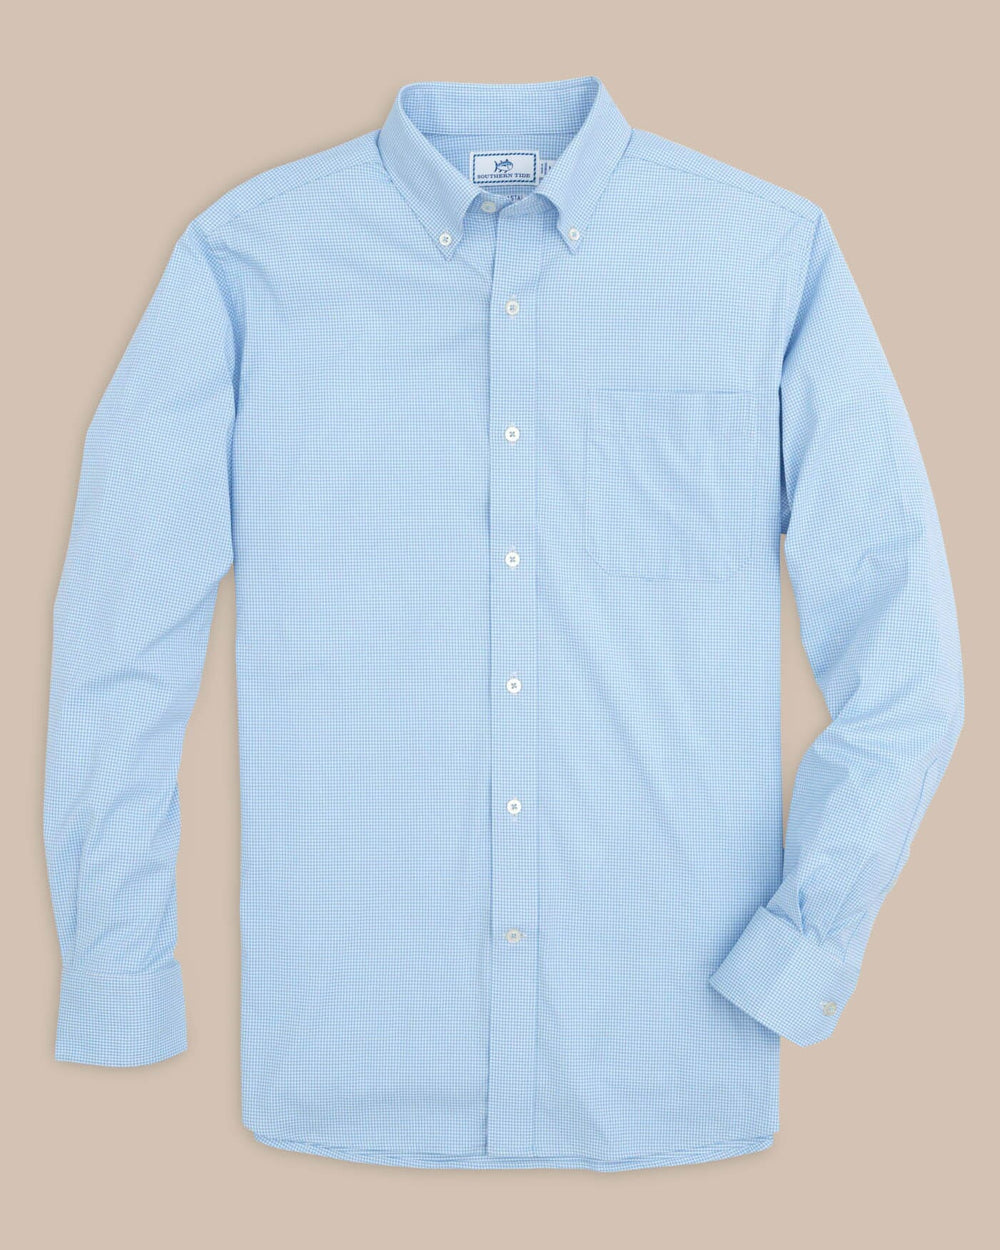 The front view of the Southern Tide Team Colors Gingham Intercoastal Sport Shirt by Southern Tide - Tide Blue